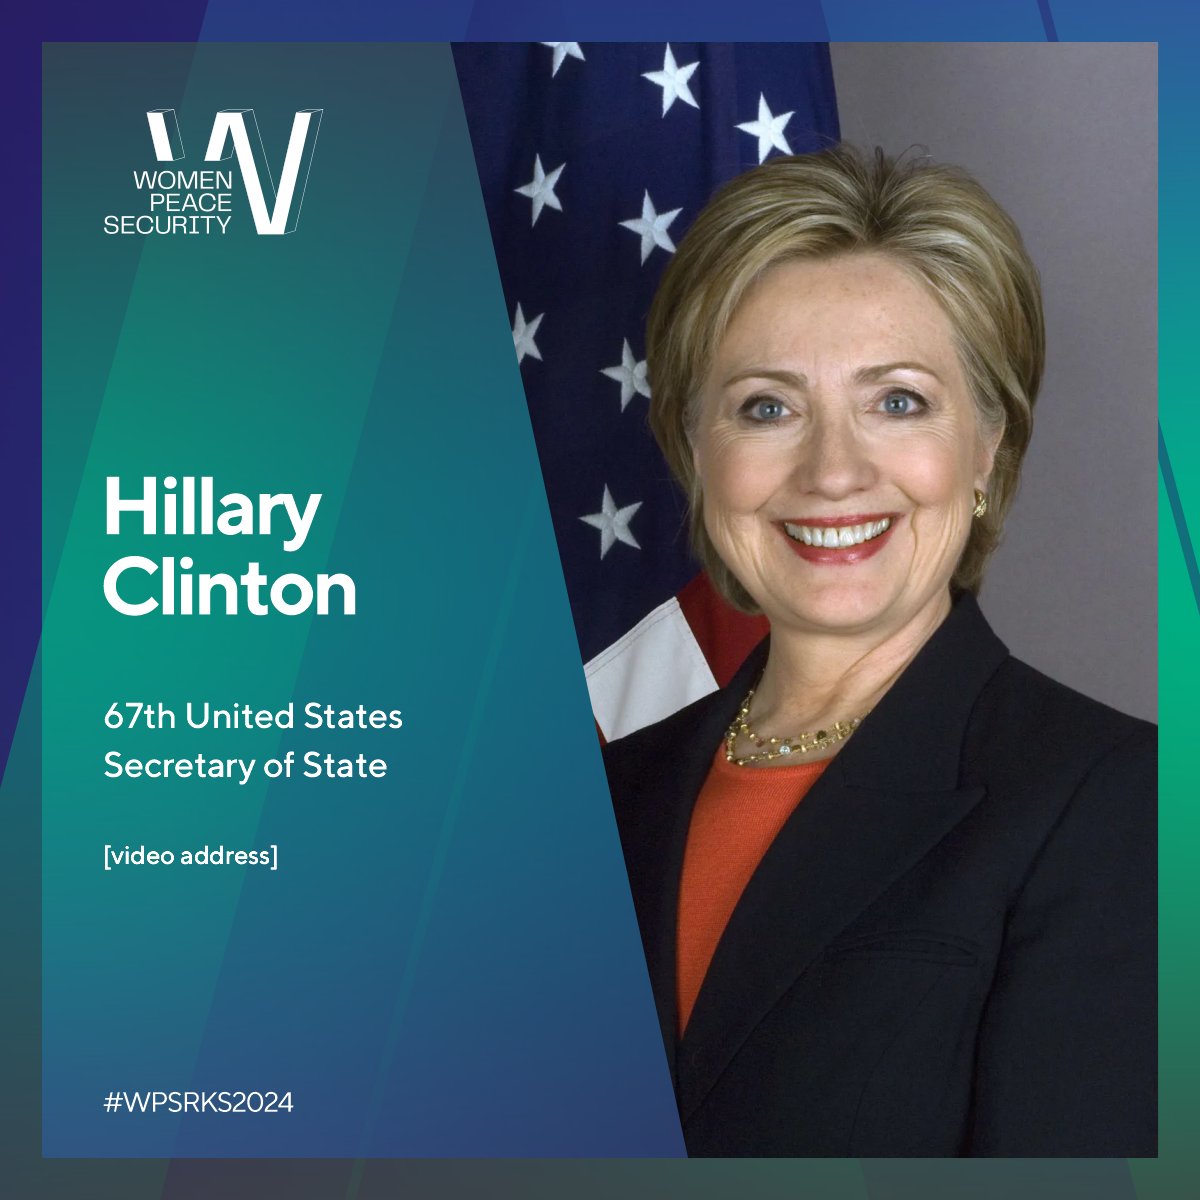 We have the great honor to have the 67th U.S. Secretary of State @HillaryClinton address us at the WPS Forum 2024! 🇽🇰🇺🇸 #WPSRKS2024 15-16 April 2024 🇽🇰 Prishtina, Kosovo 👉 wpsforum-rks.org